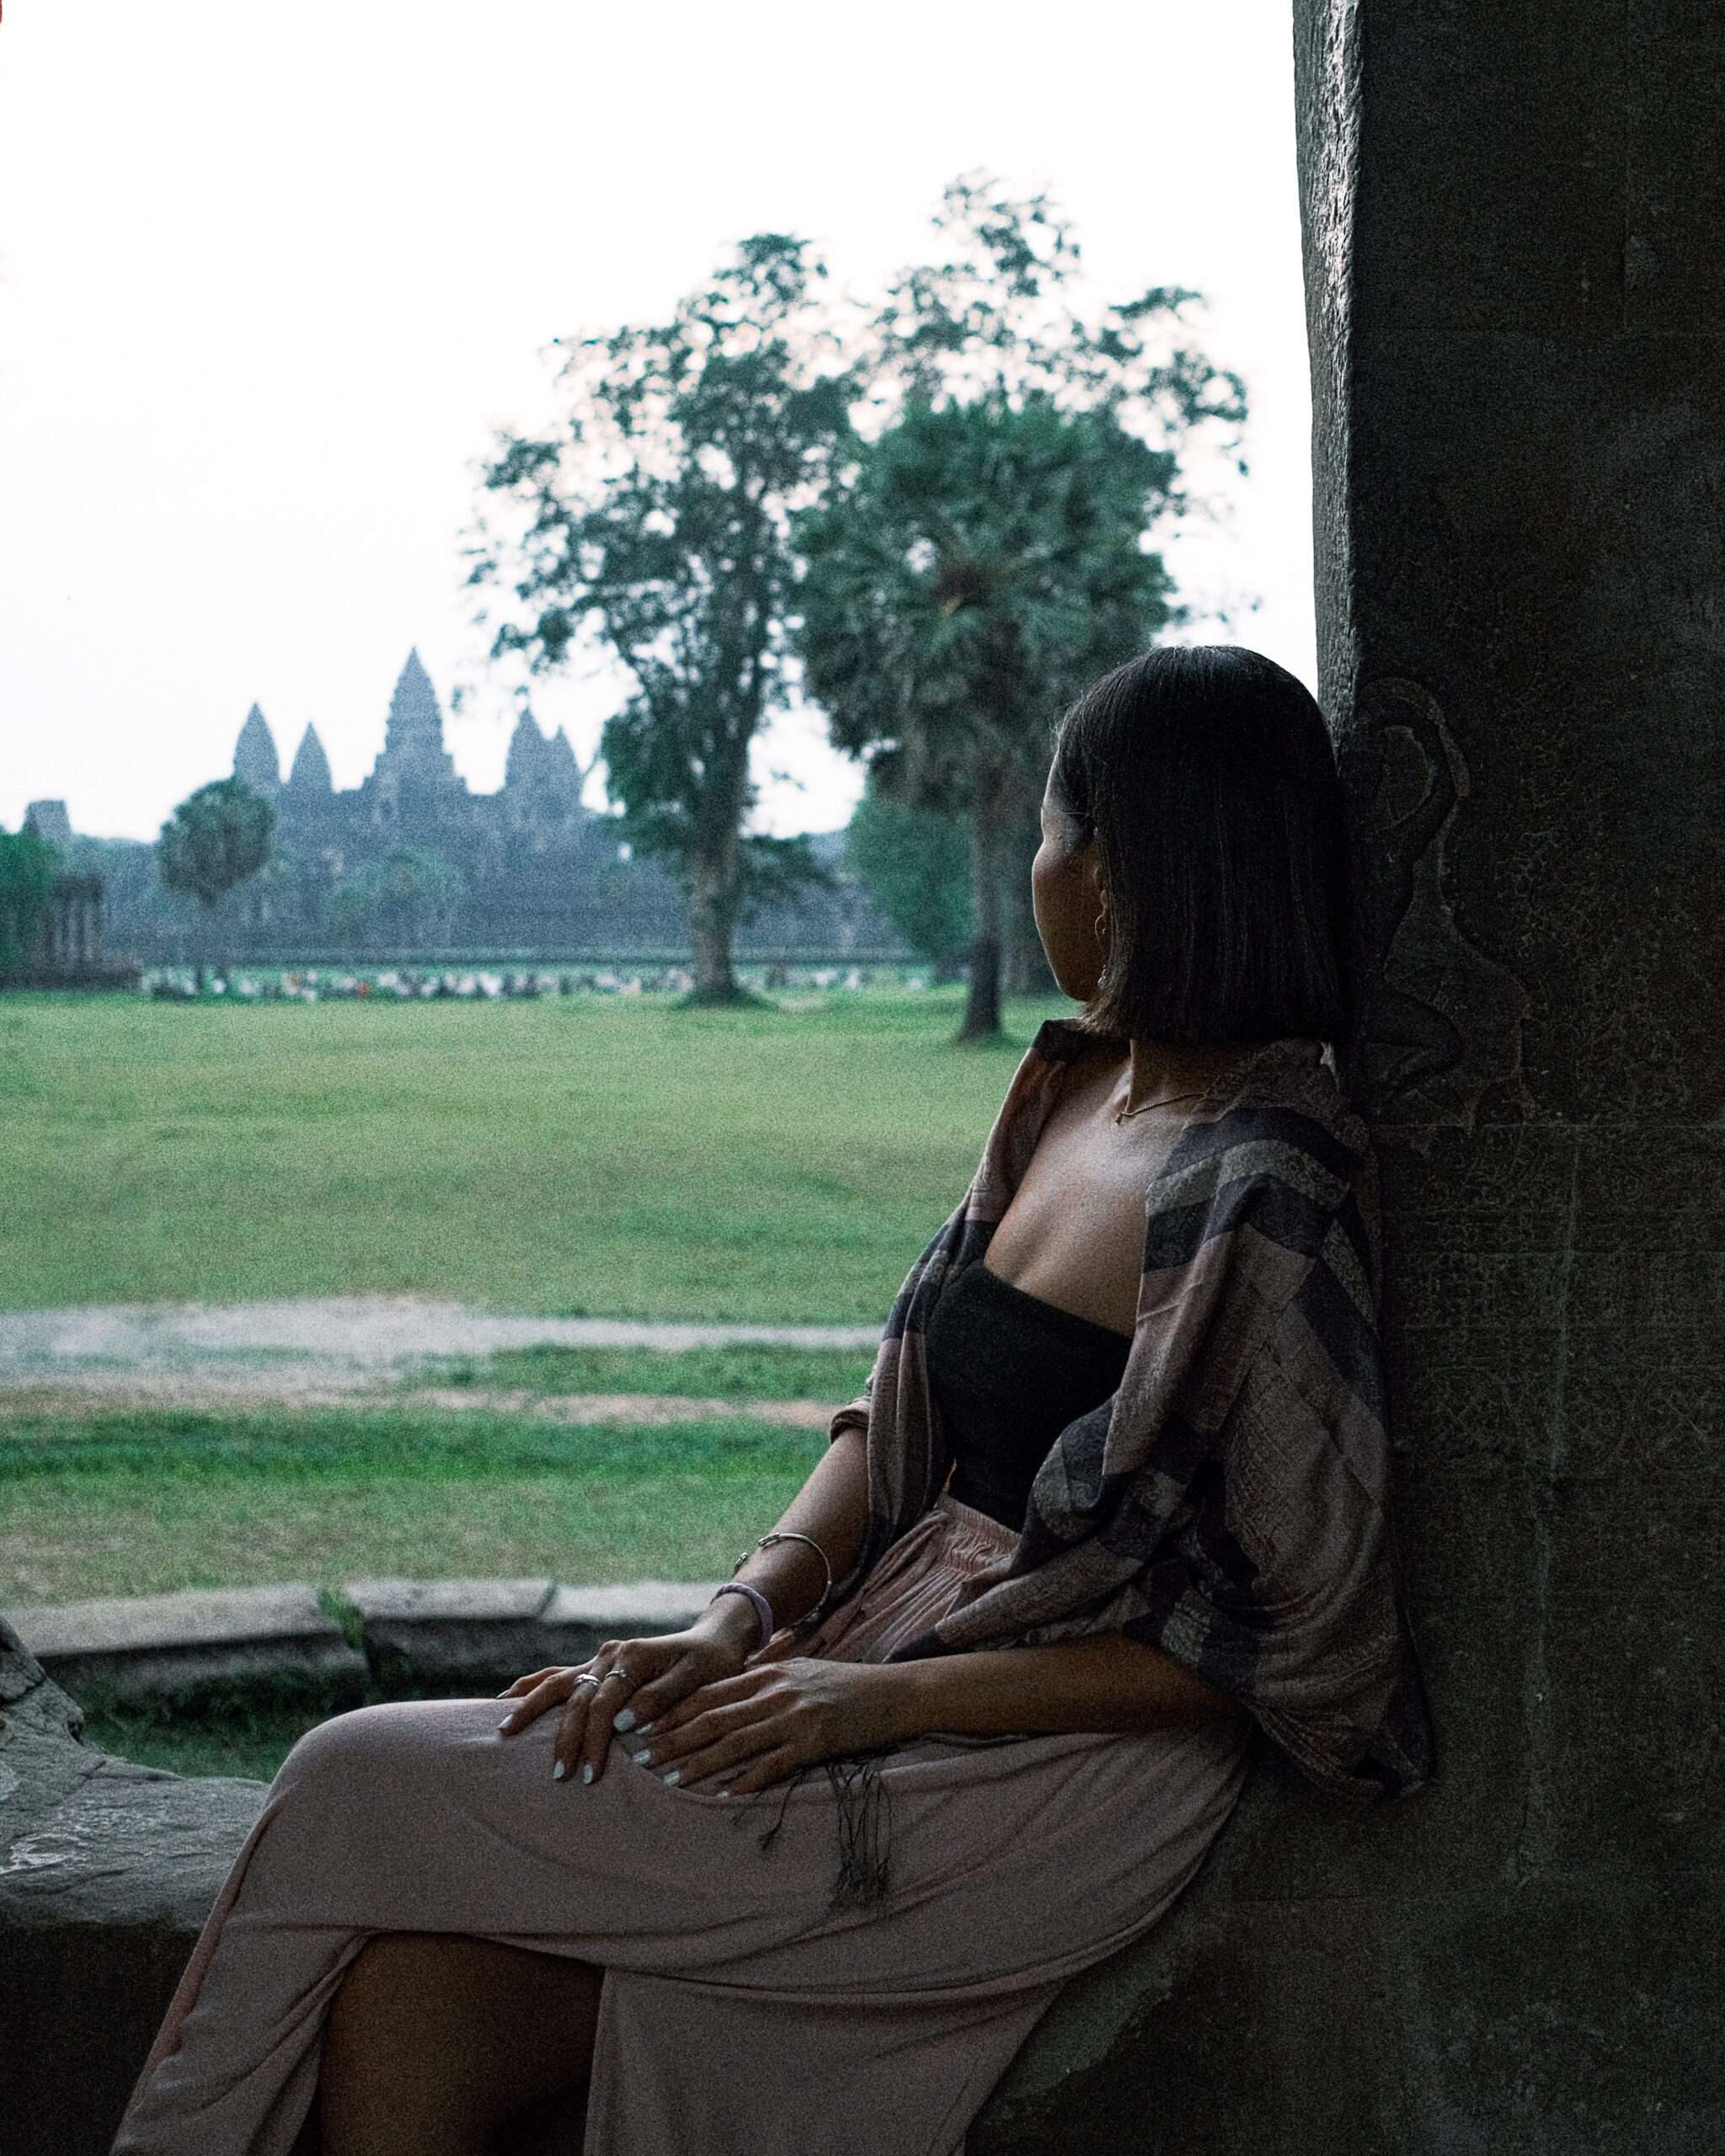 Woman sitting and looking at the Angkor Wat in Siem Reap, Cambodia